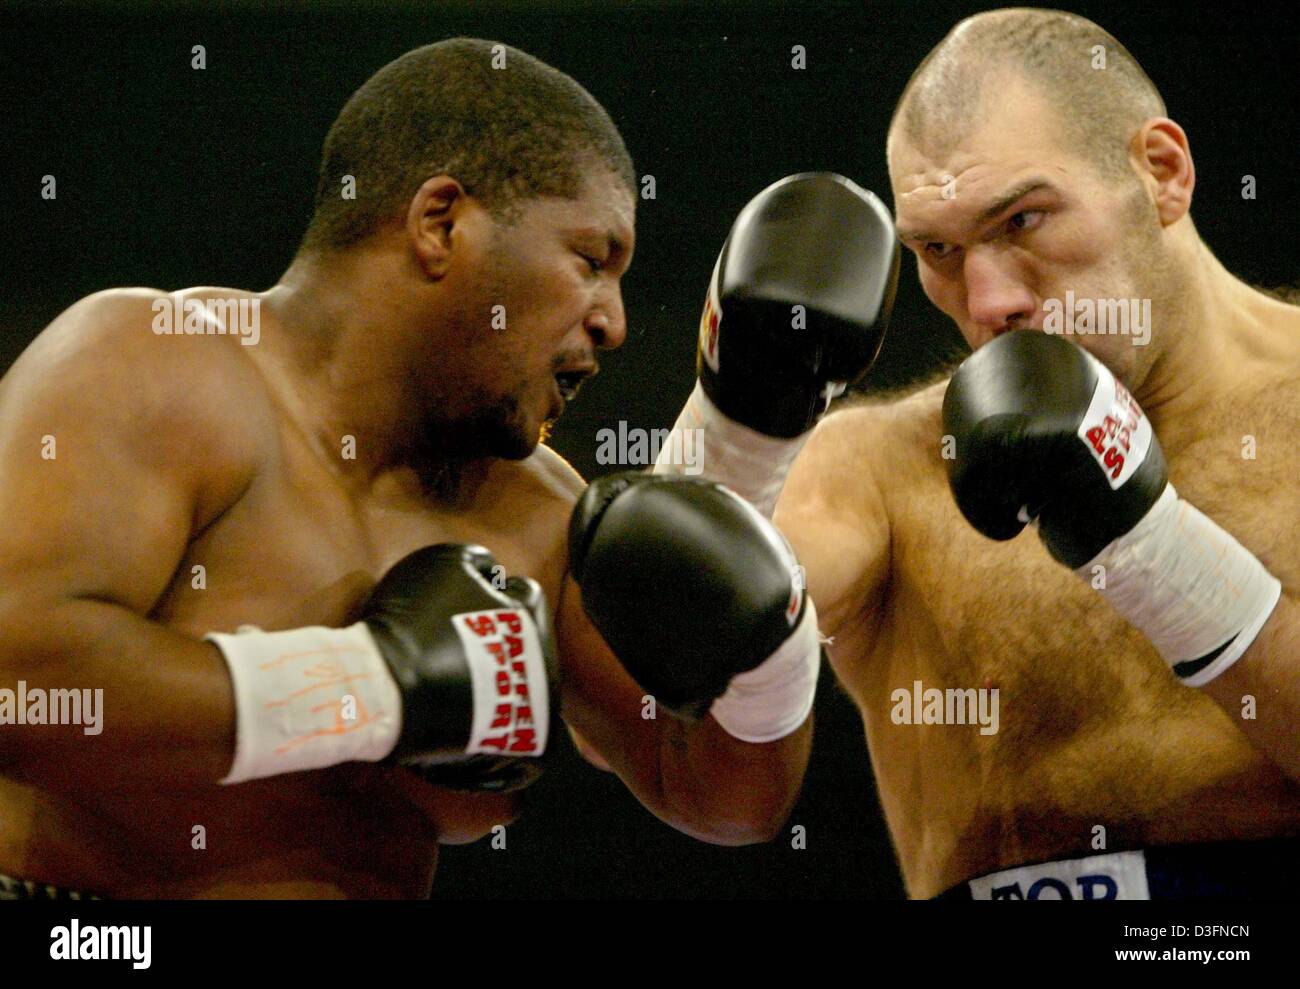 (dpa) - Russian boxer Nikolai Valuev (R) fights against US Gerald Nobles during their WBA heavyweight bout in Kempten, Germany, 20 November 2004. Valuev was disqualified in the fourth round for repeatedly hitting Nobles below the belt. Stock Photo